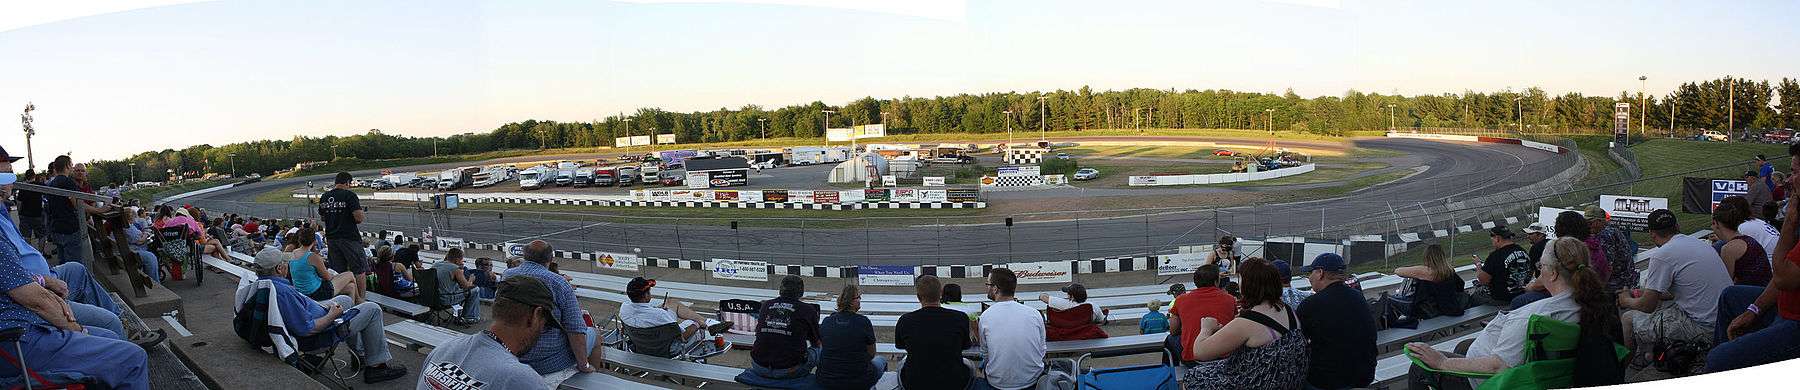 Panorama of Marshfield Motor Speedway from frontstretch